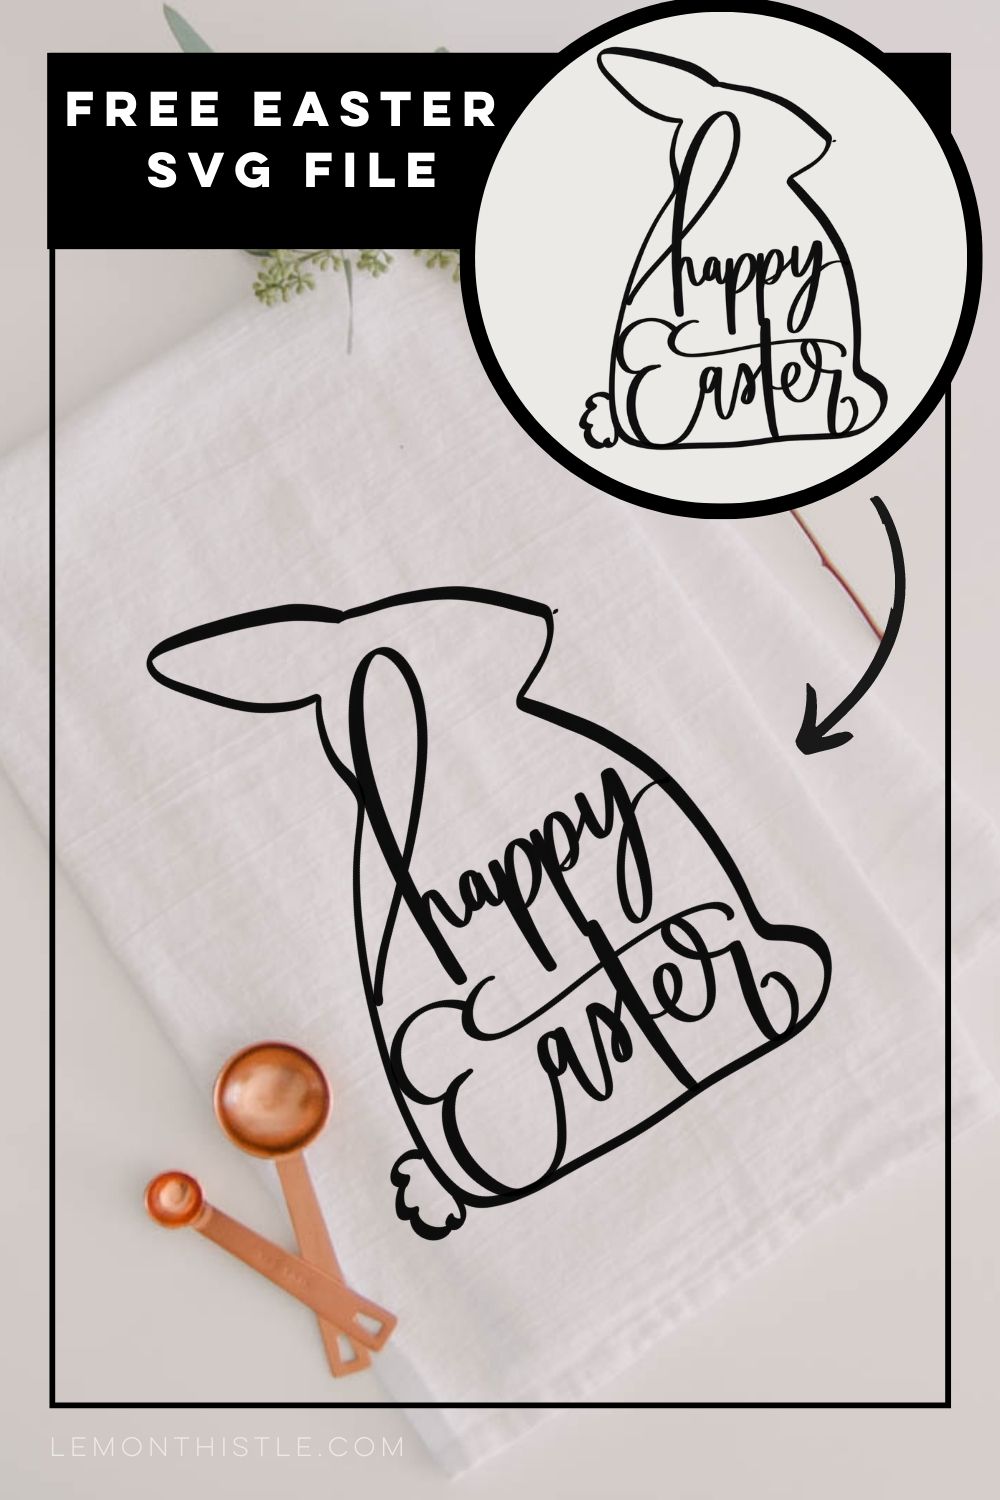 tea towel with hand lettered easter bunny silhouette ironed on. title text reads: free svg